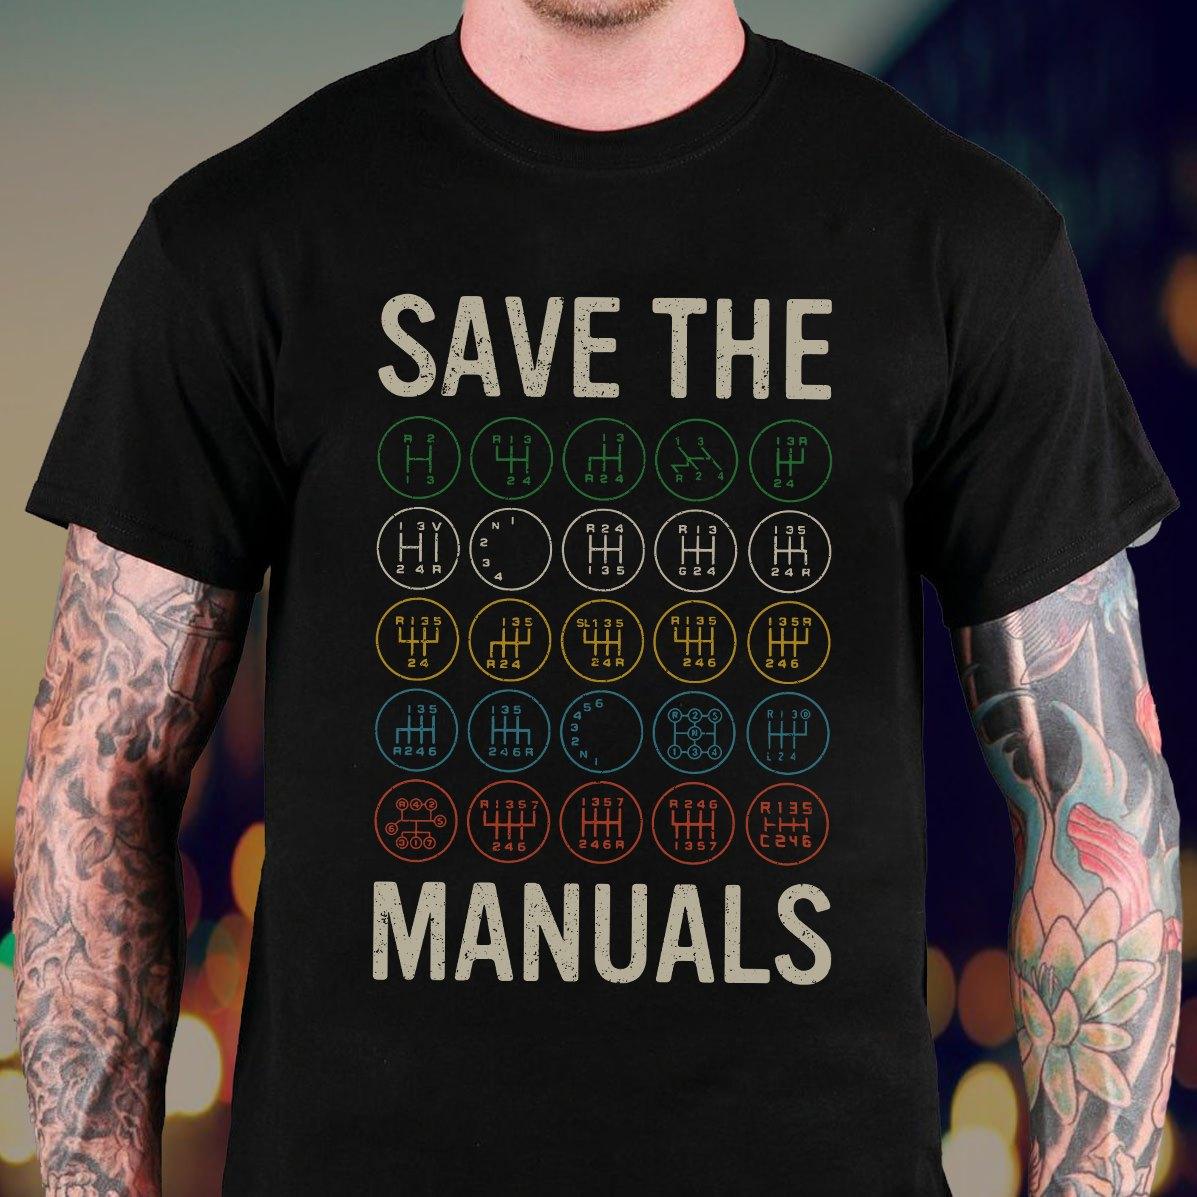 Save the manual - Gift for truck driver, truck gear box